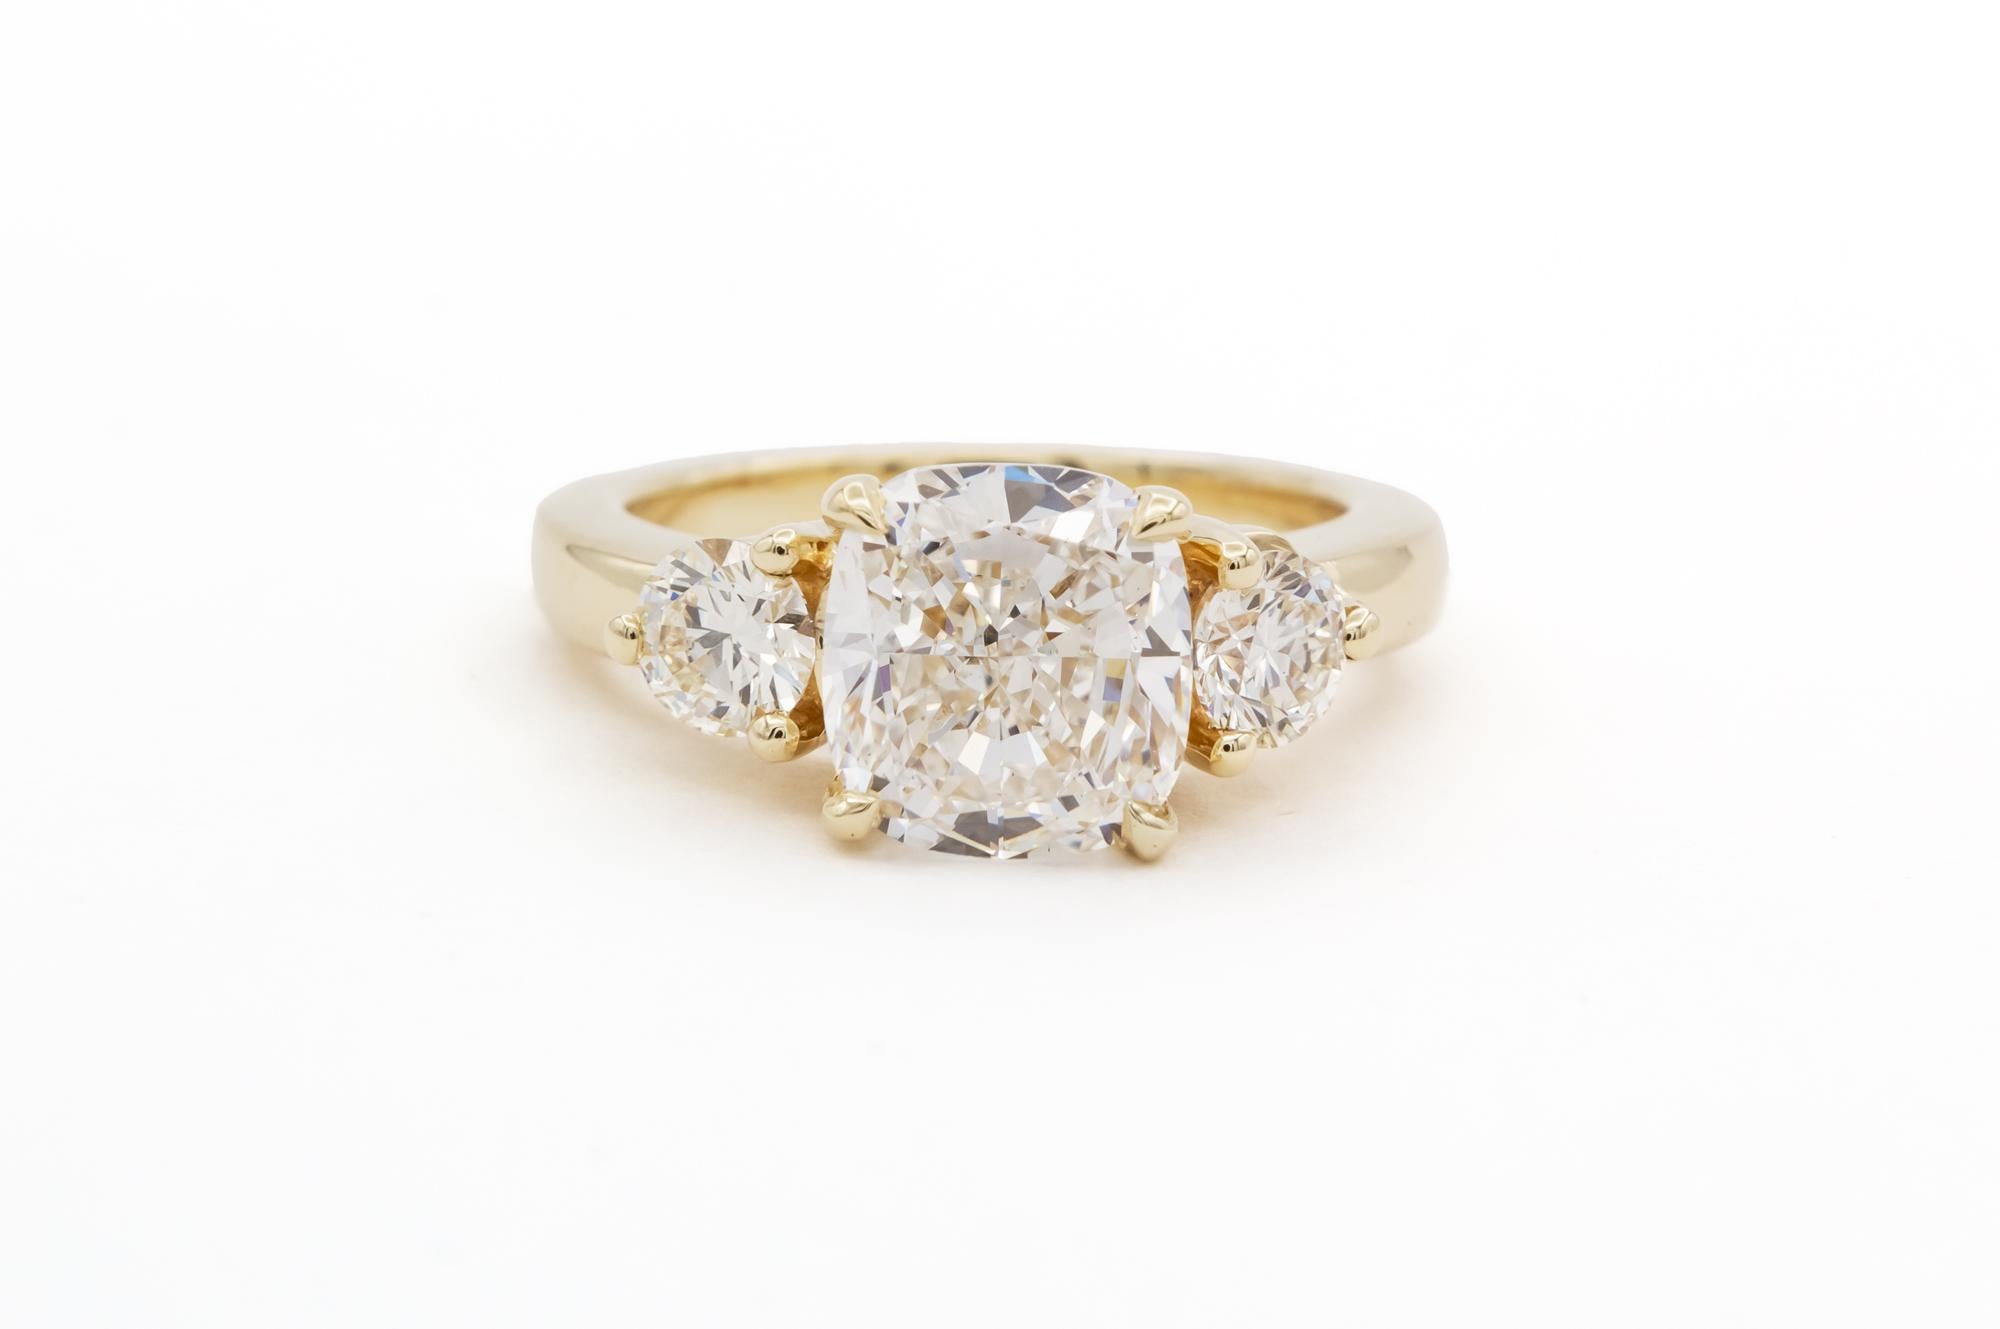 We are pleased to offer this GIA Certified & Laser Inscribed 14k Yellow Gold & Diamond Three Stone Engagement Ring. This beautiful classic ring features a GIA certified 3.10ct H/VS2 cushion cut diamond set in a 14k yellow gold three stone setting